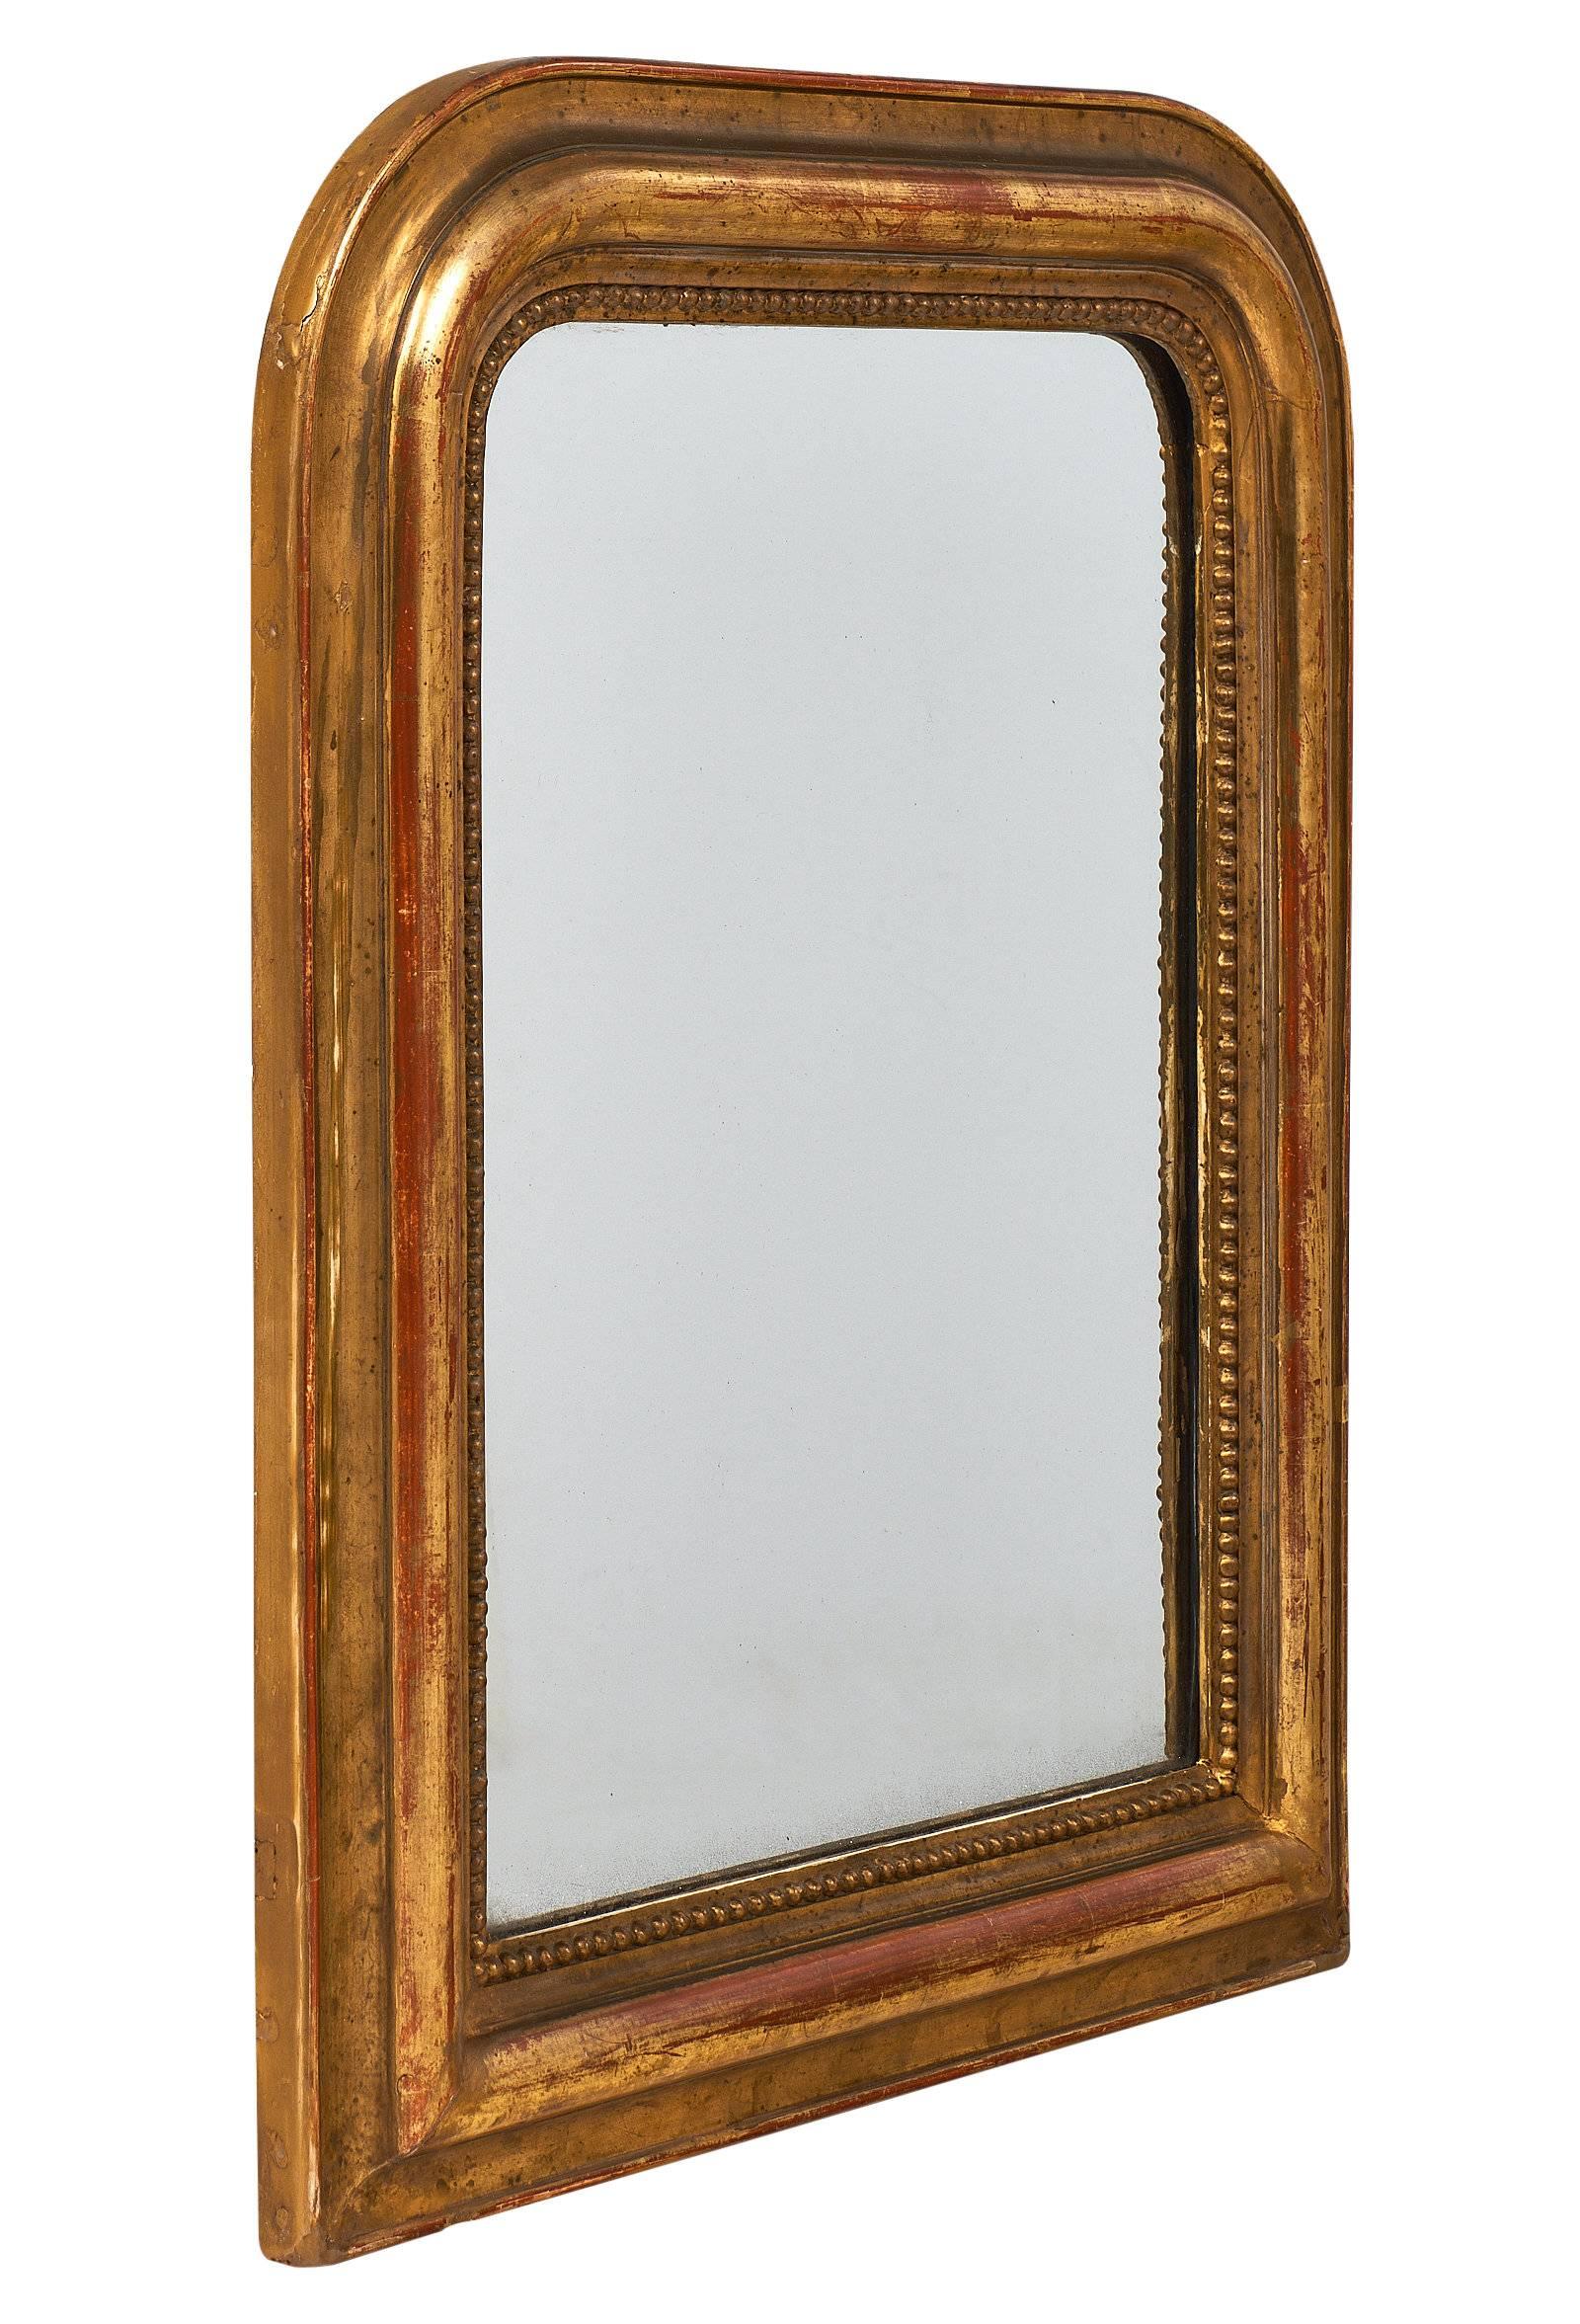 Lovely mirror from the Louis Philippe period with the original mirror. This small piece has a hand-carved frame with beading surrounding the original mirror, and a striking patina. The frame also has the characteristic curved upper corners of the